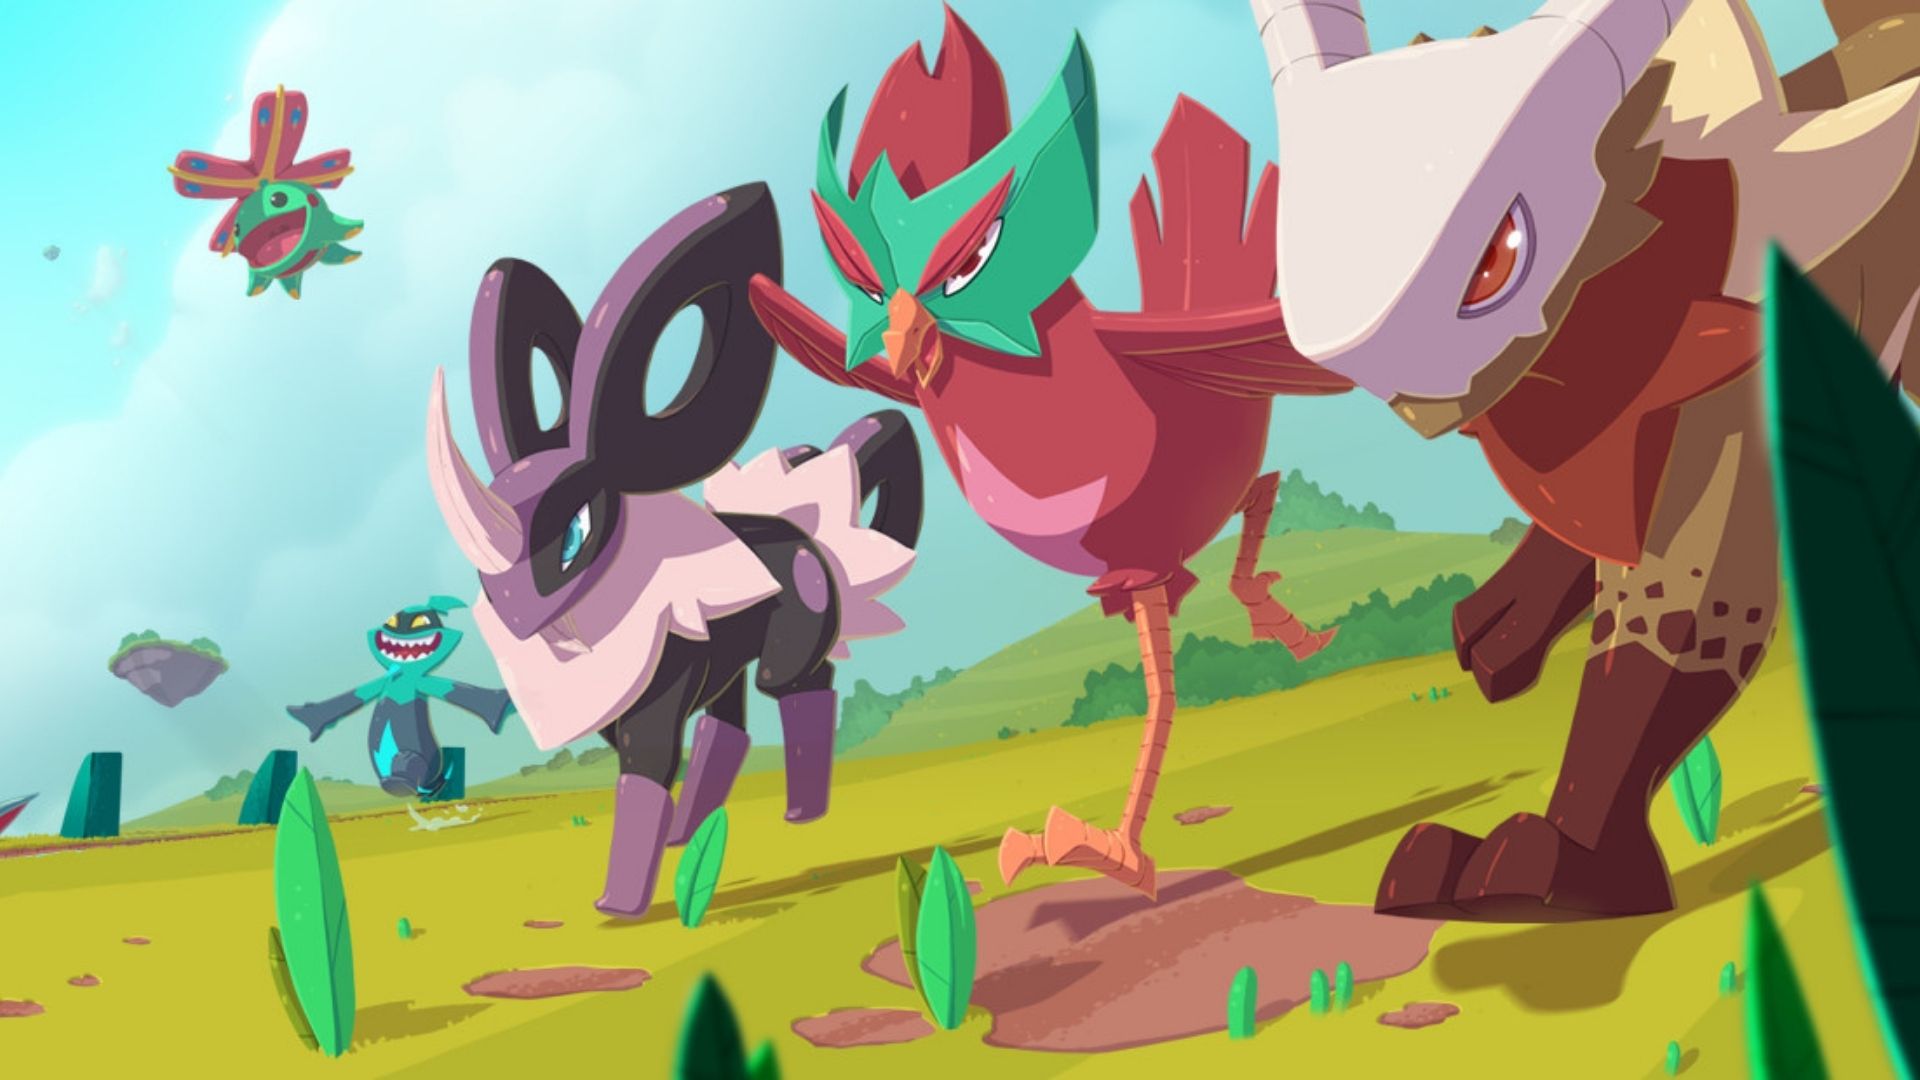 Art from Temtem, a game like Pokémon, featuring three animas: one looks like a chicken in a Venetian mask, one looks like a long-legged rabbit with a Rhino horn, the other looks like a small boy with a skull on their head.